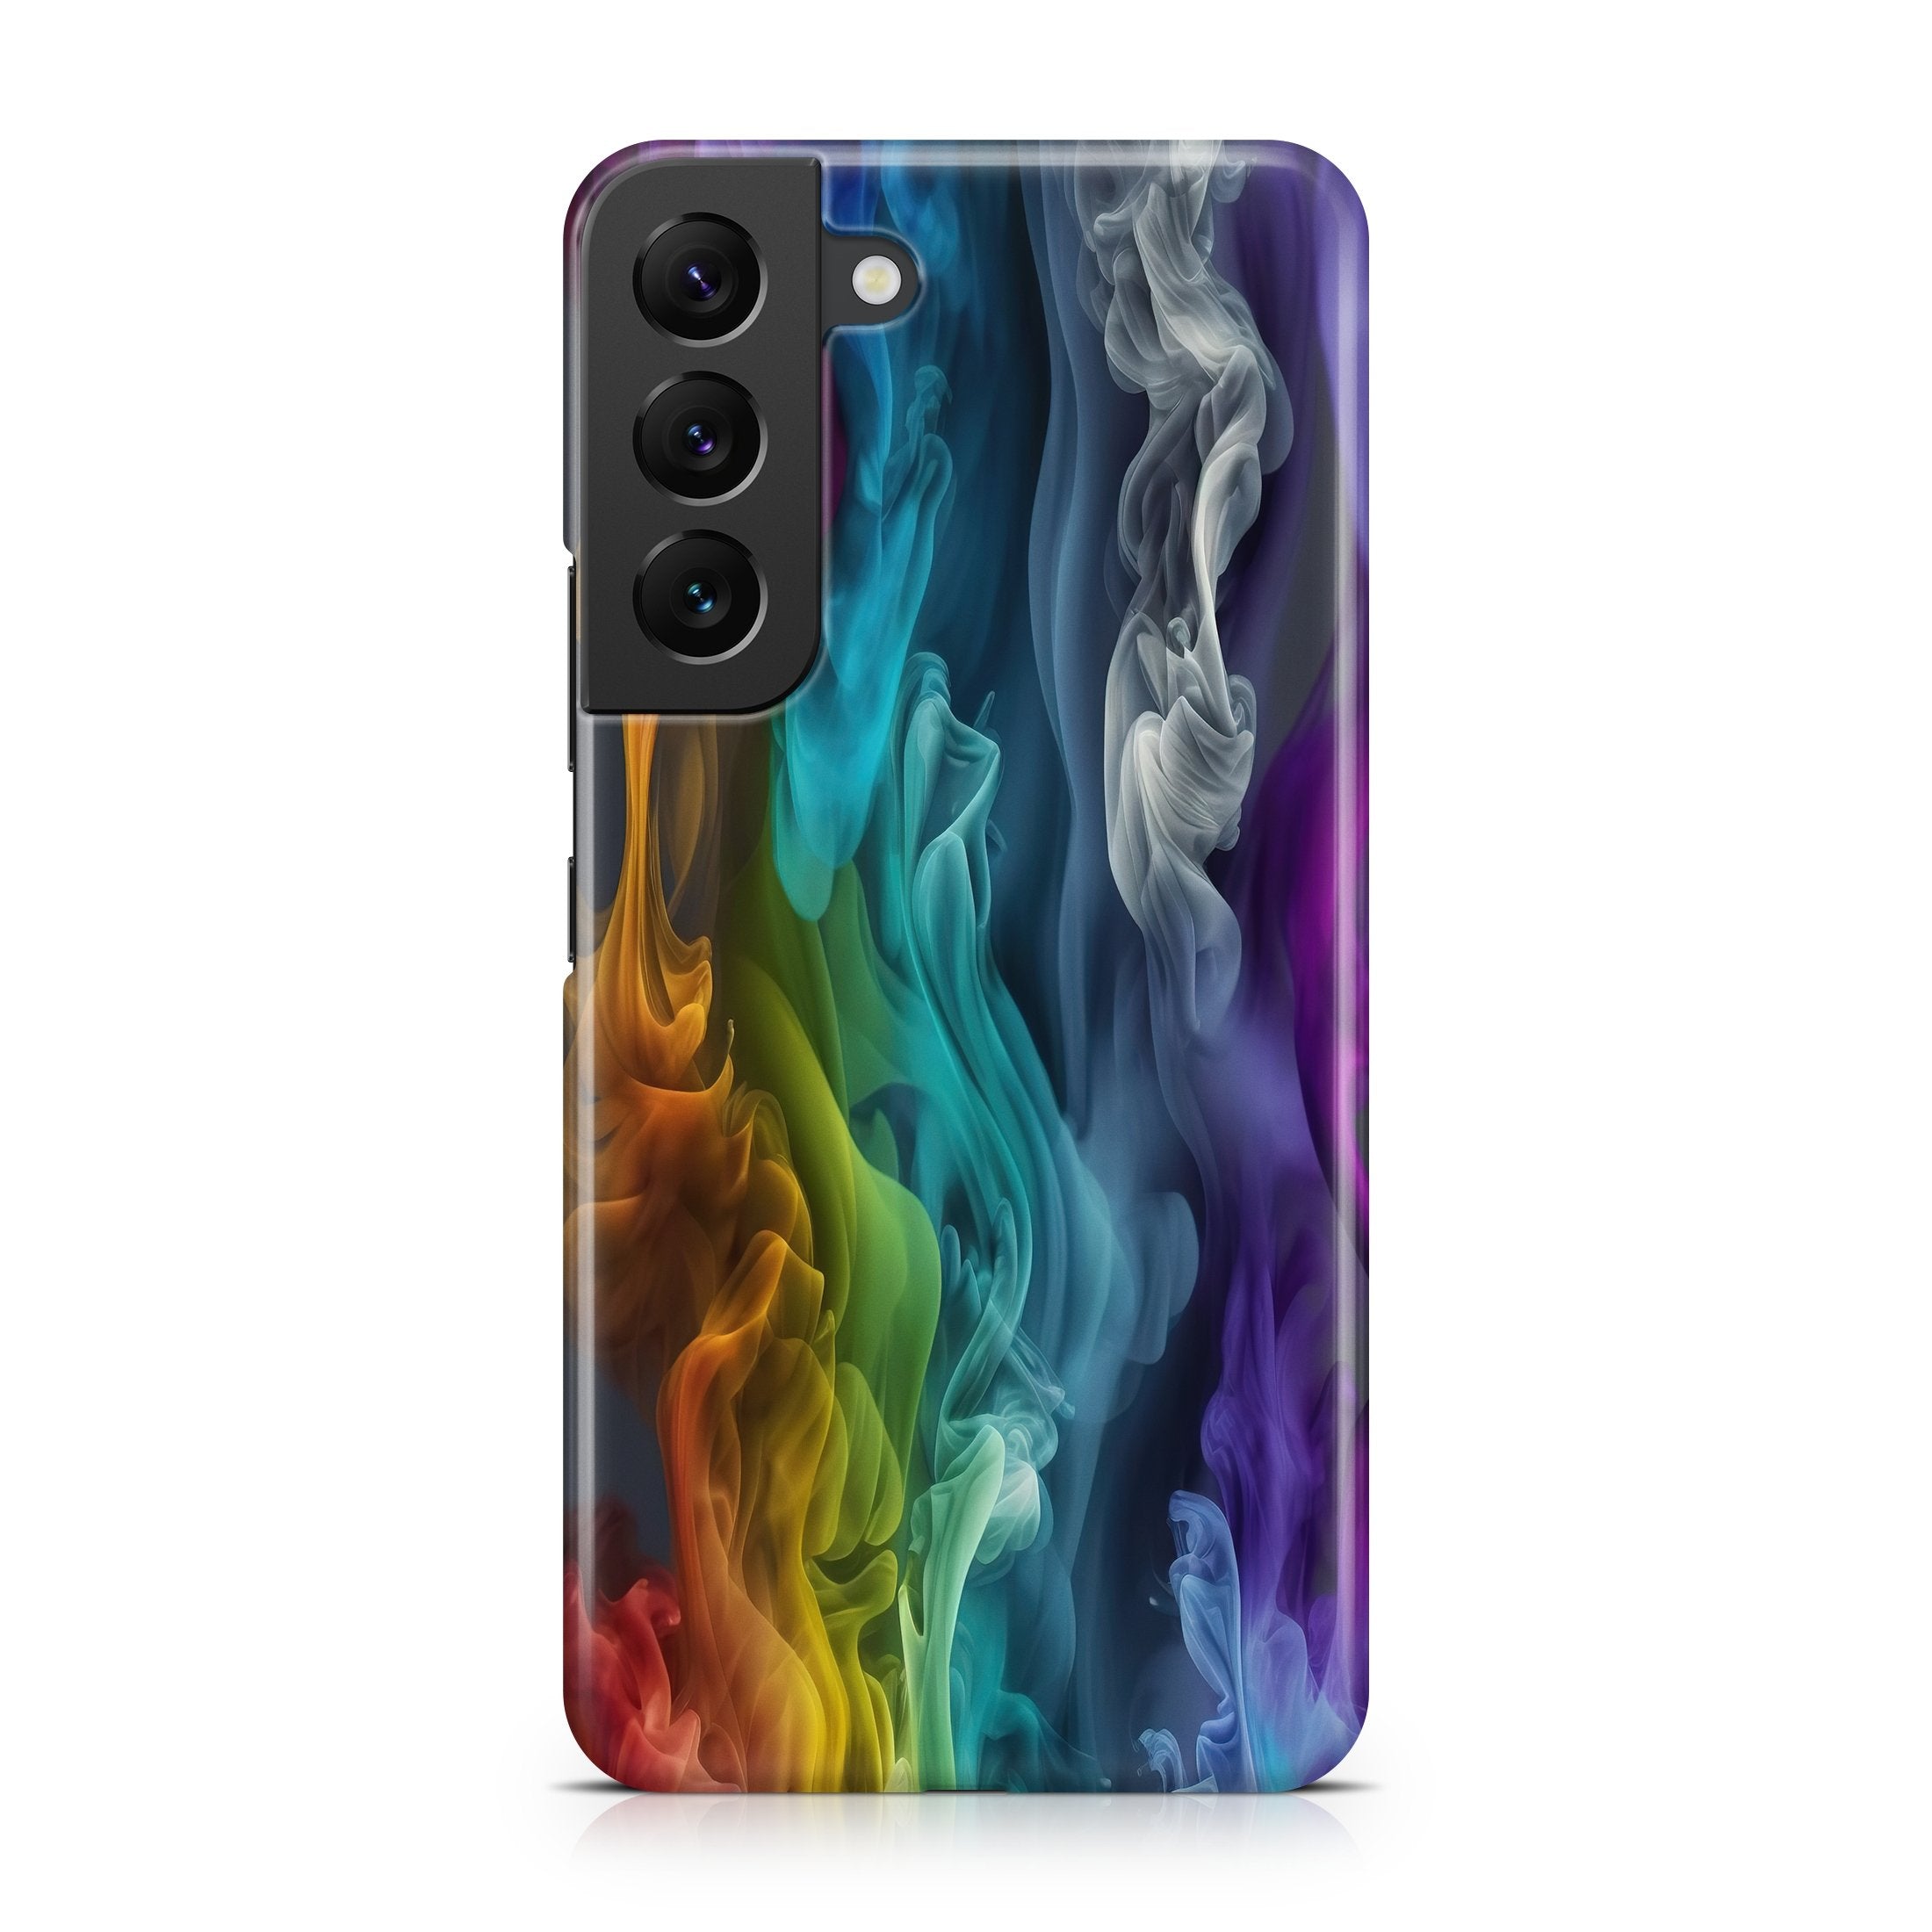 Stream Smoke - Samsung phone case designs by CaseSwagger